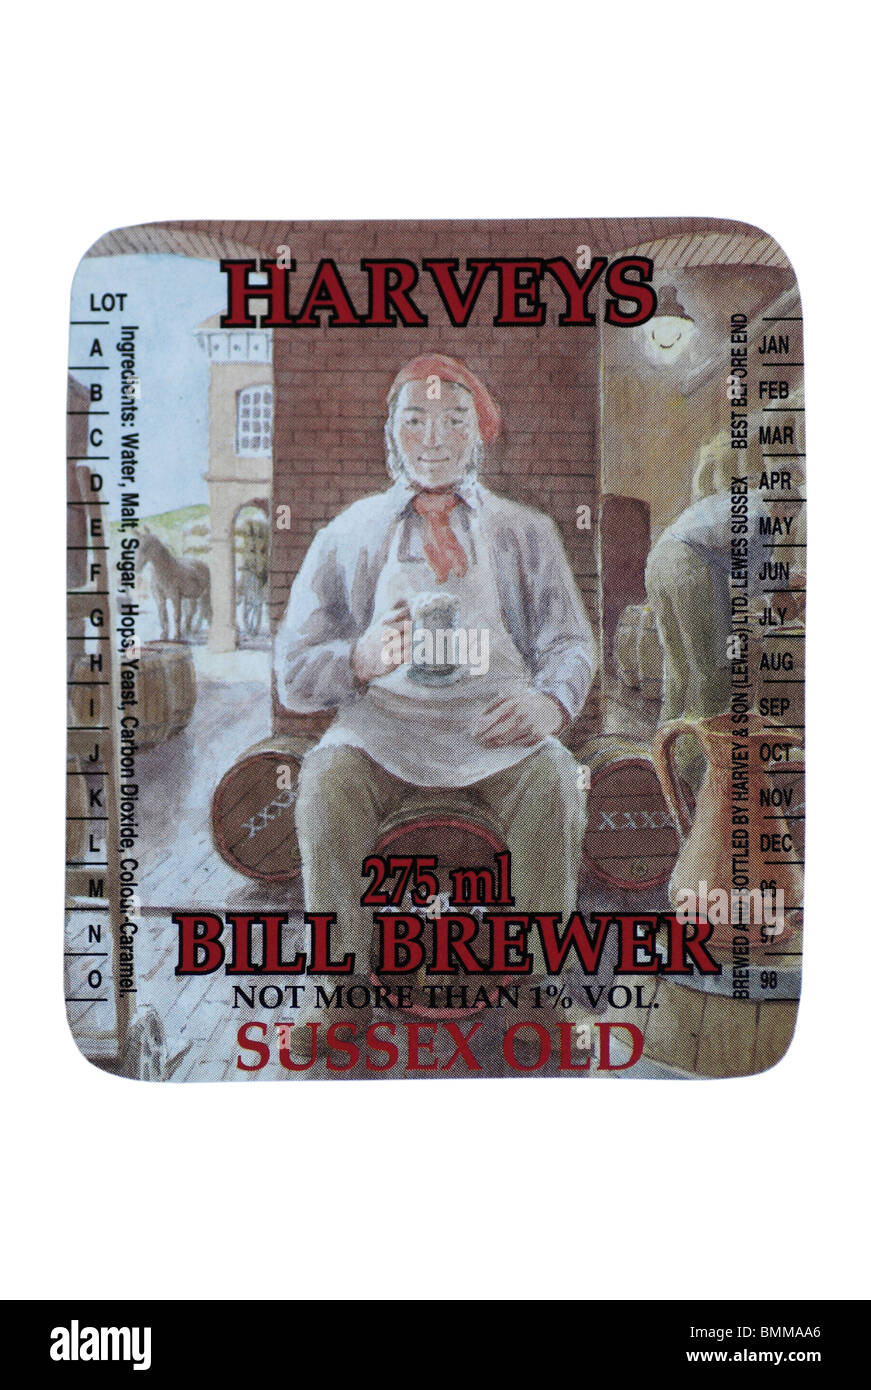 Harveys Bill Brewer (low alcohol Old Ale) Bottled Beer label - circa 1996 - 1998 - the beer is still brewed @ June 2010. Stock Photo